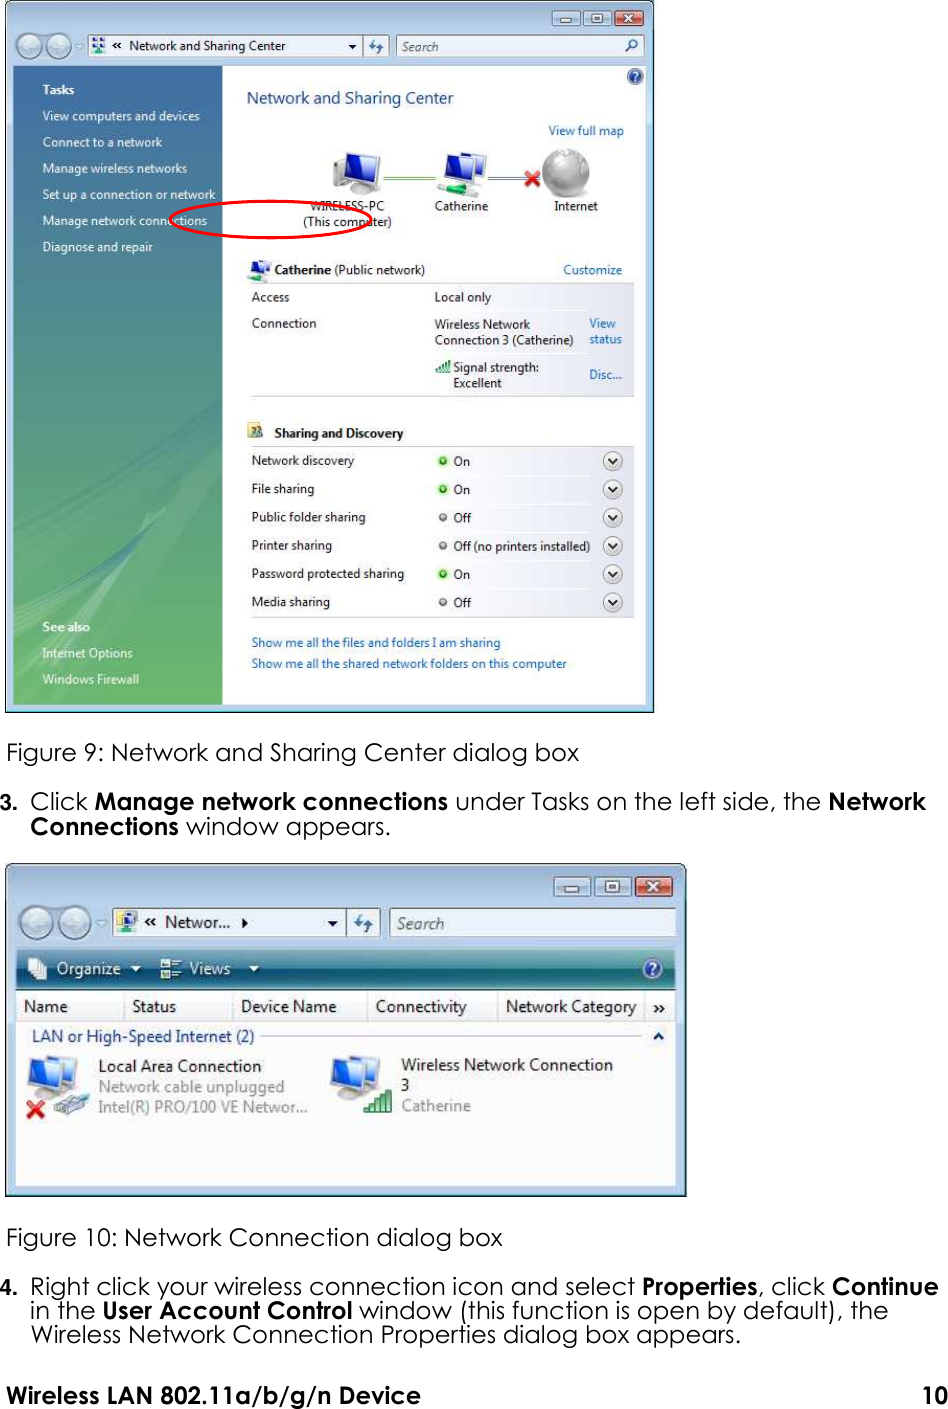 Wireless LAN 802.11a/b/g/n Device                                                                                  10  Figure 9: Network and Sharing Center dialog box   3. Click Manage network connections under Tasks on the left side, the Network Connections window appears.    Figure 10: Network Connection dialog box 4. Right click your wireless connection icon and select Properties, click Continue in the User Account Control window (this function is open by default), the Wireless Network Connection Properties dialog box appears. 